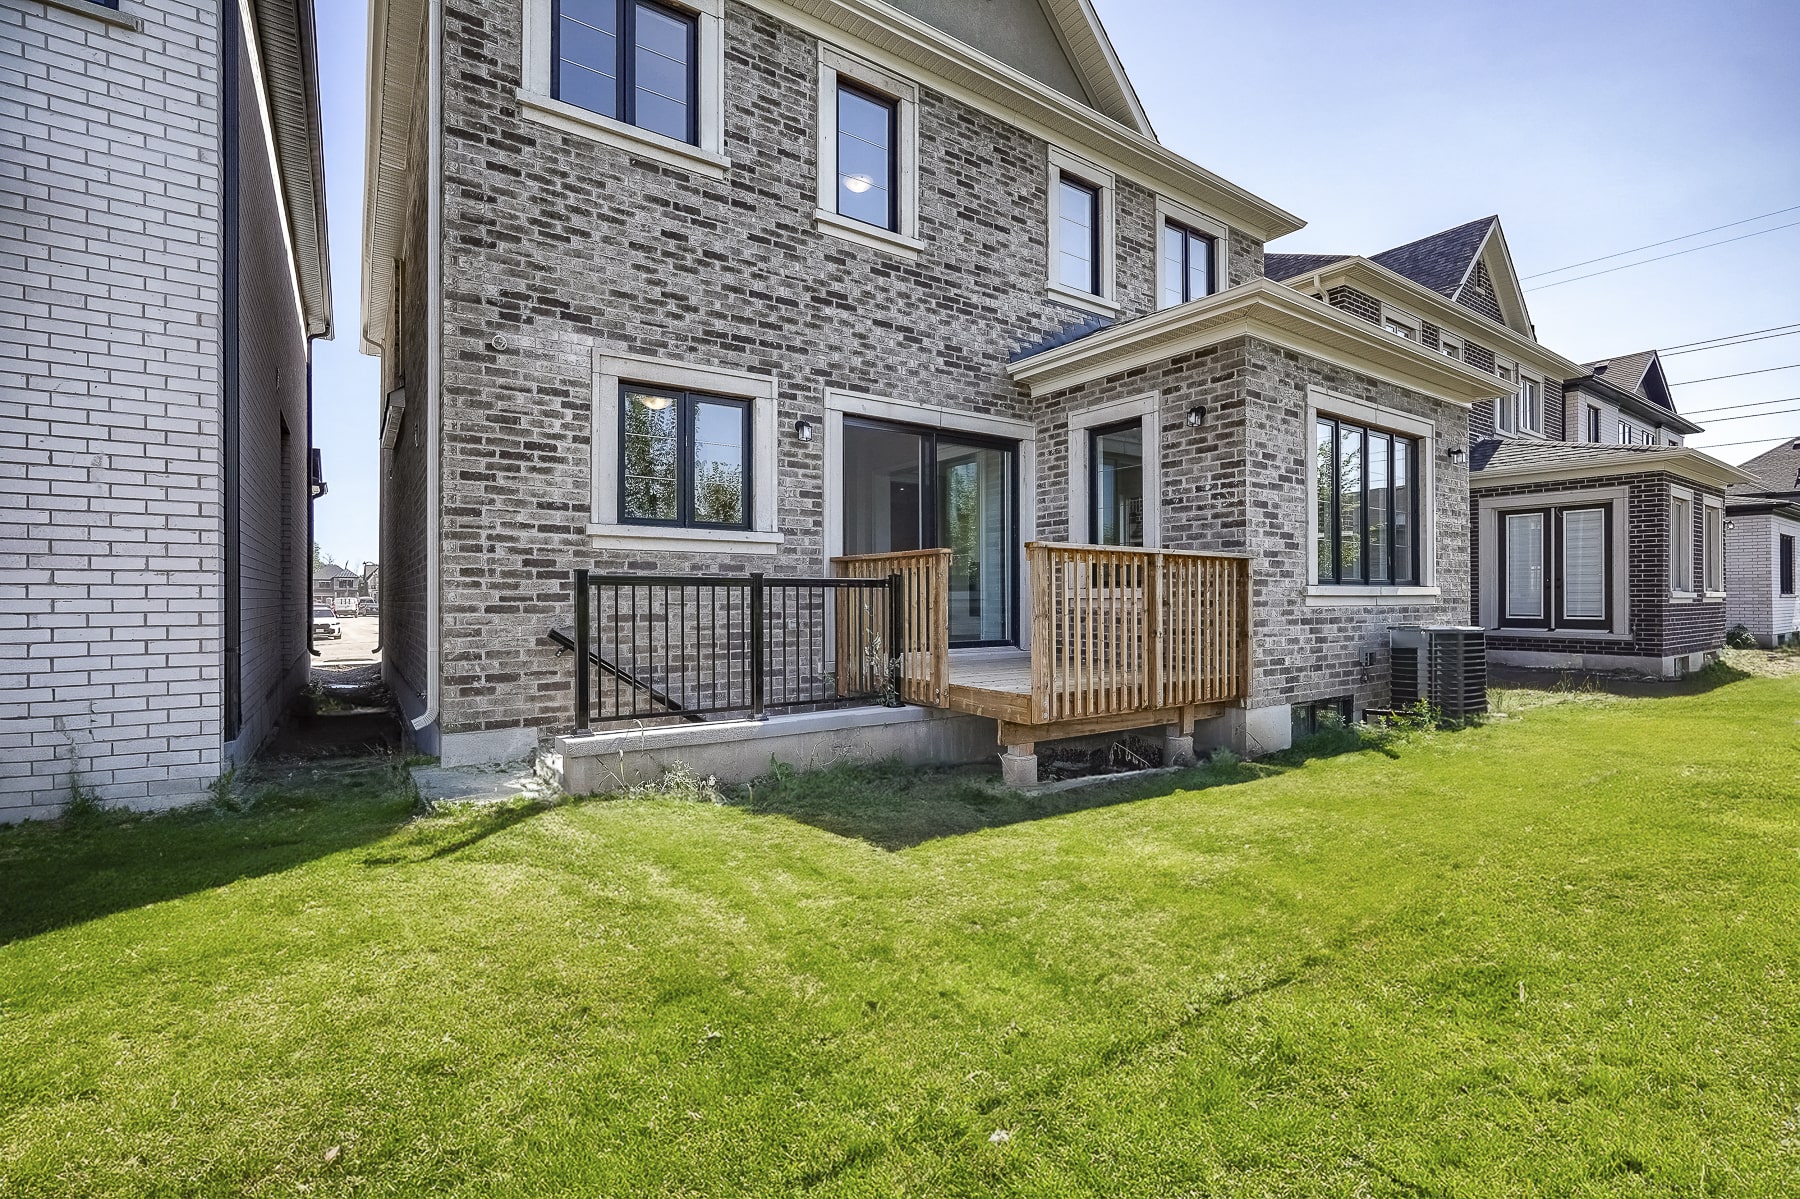 https://www.spectrumrealtyservices.com/images/Bronte-Green-at-Glen-Abbey-unit-2385-2.jpg